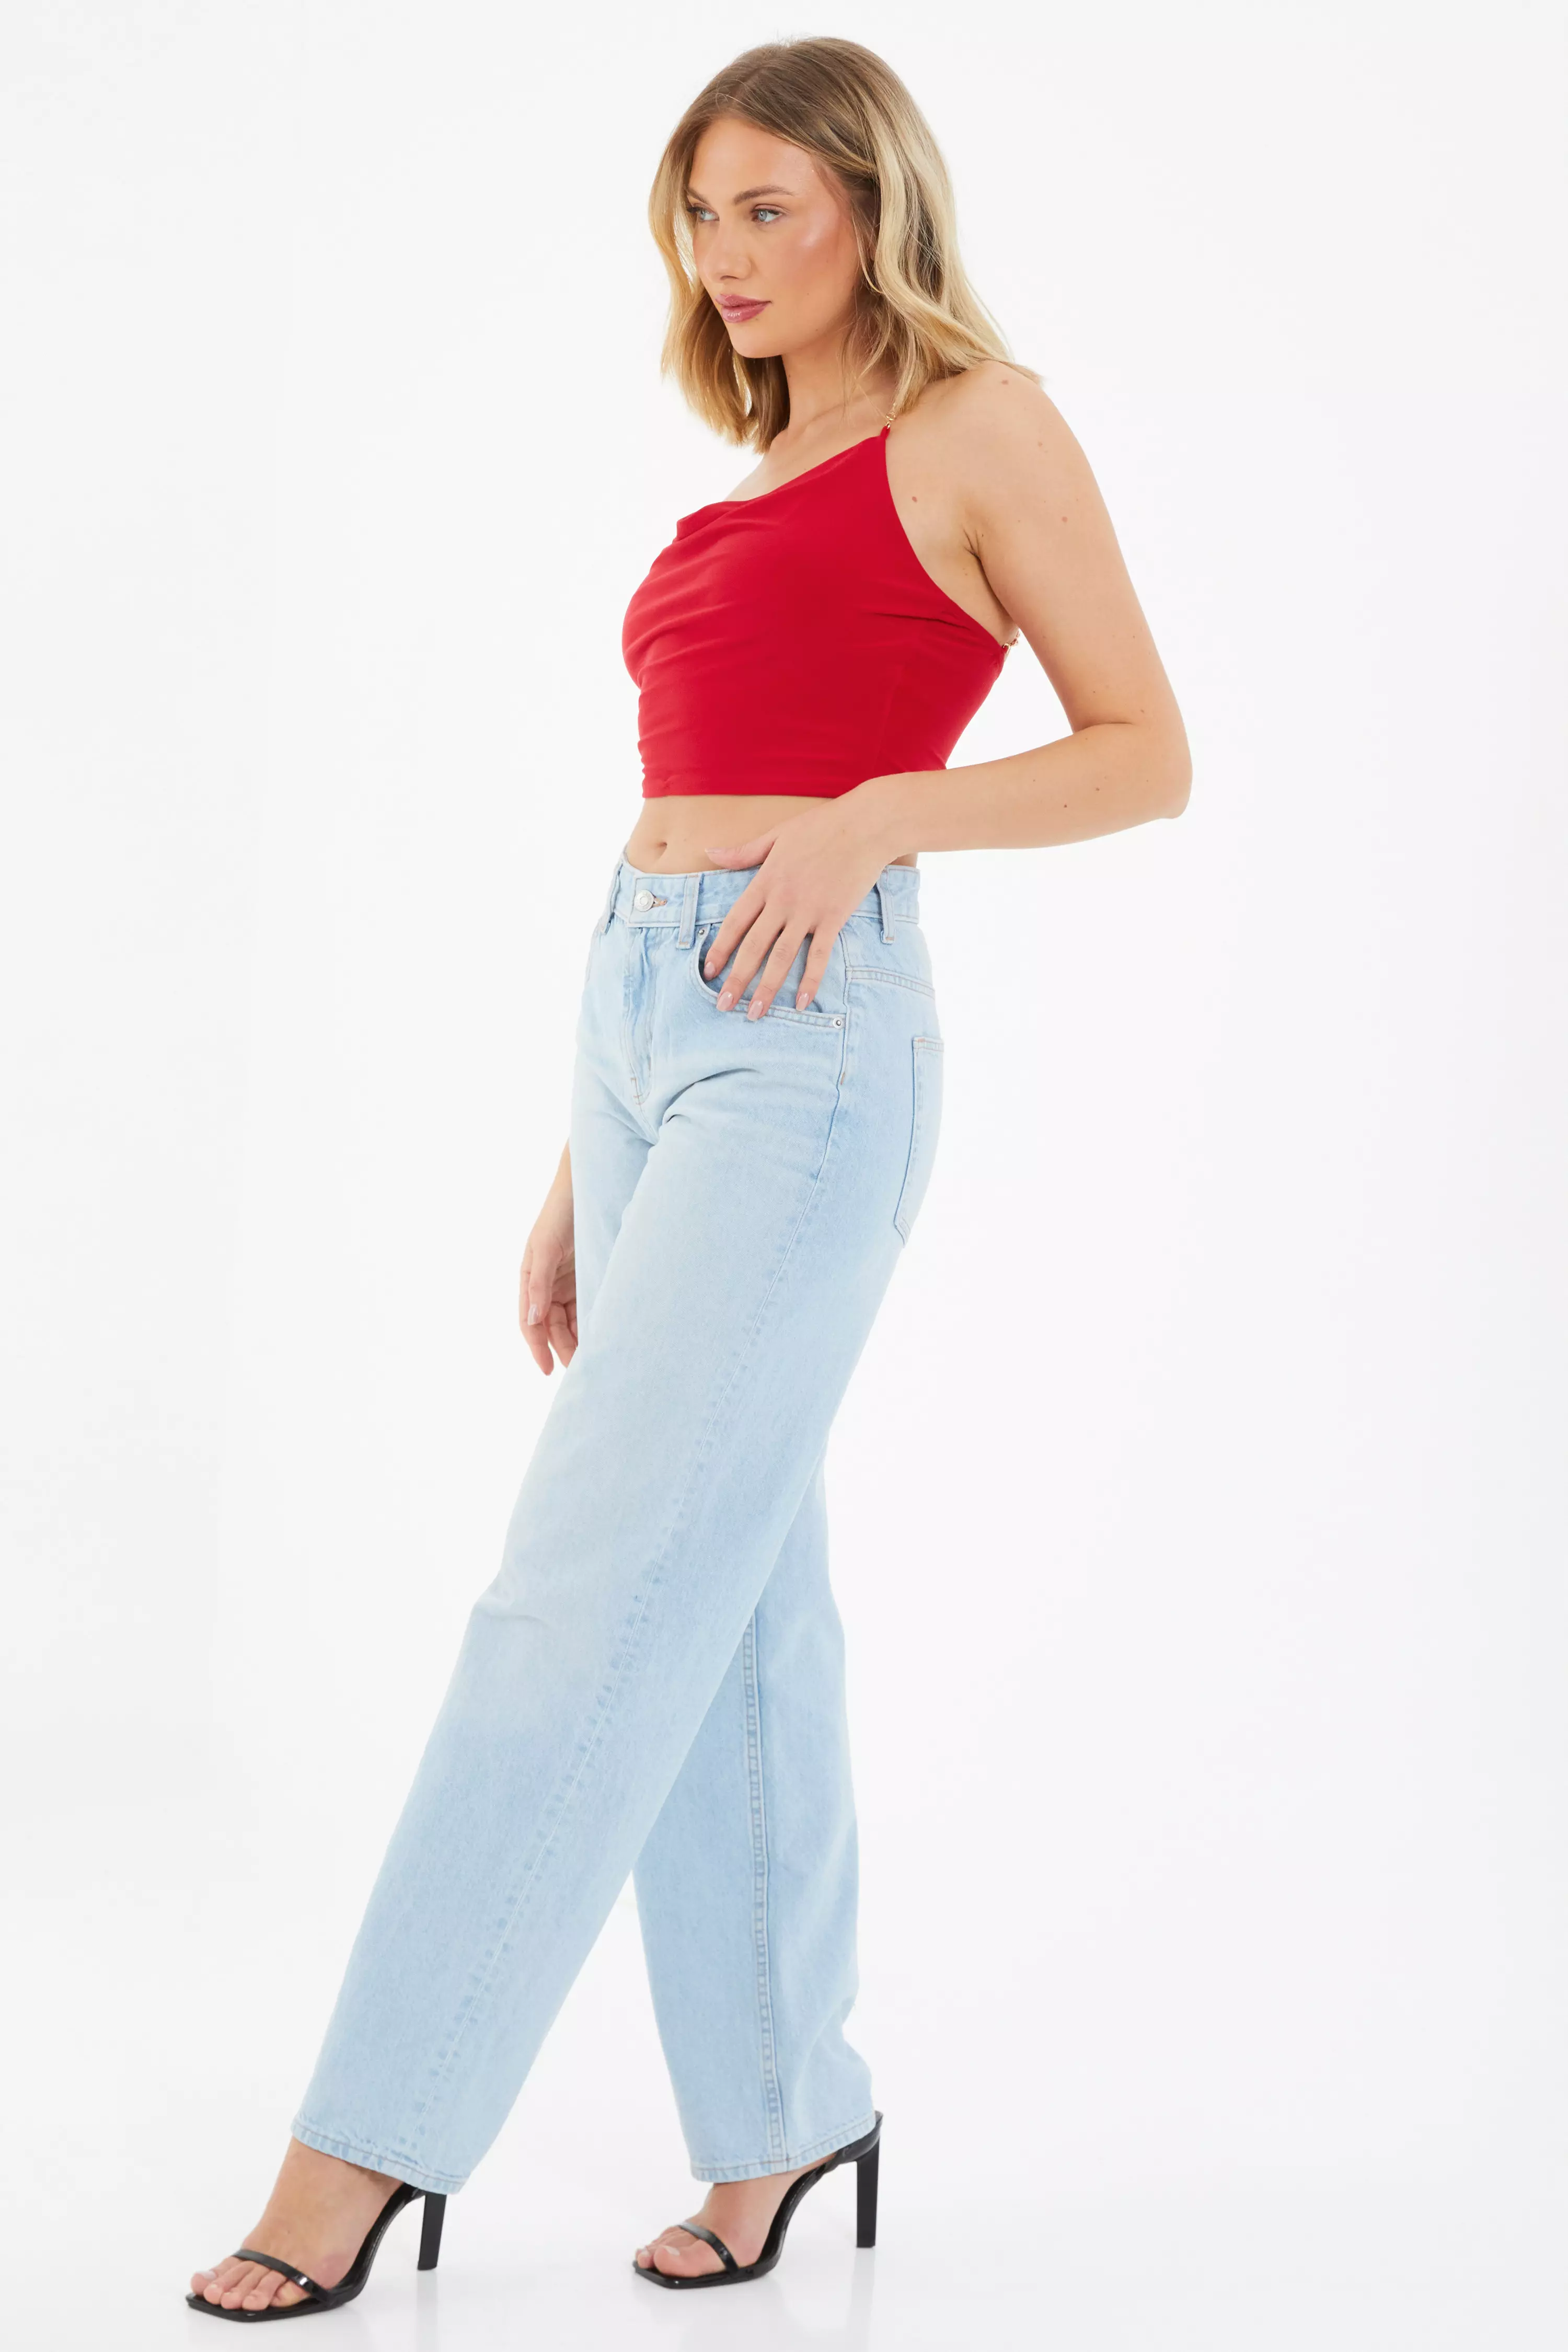 Red Chain Crop Top